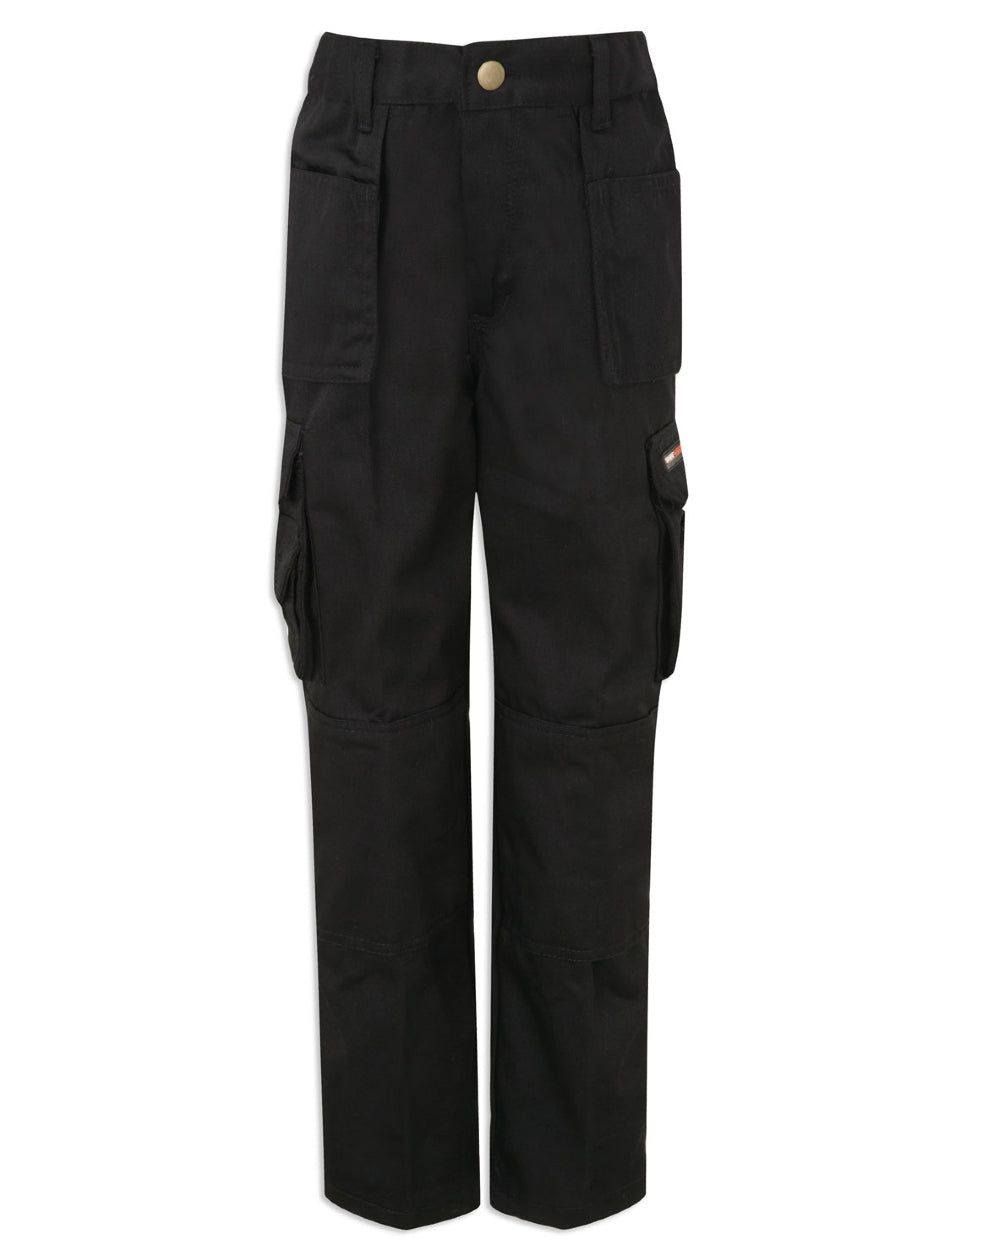 Trousers e.s.image grey/black | Strauss